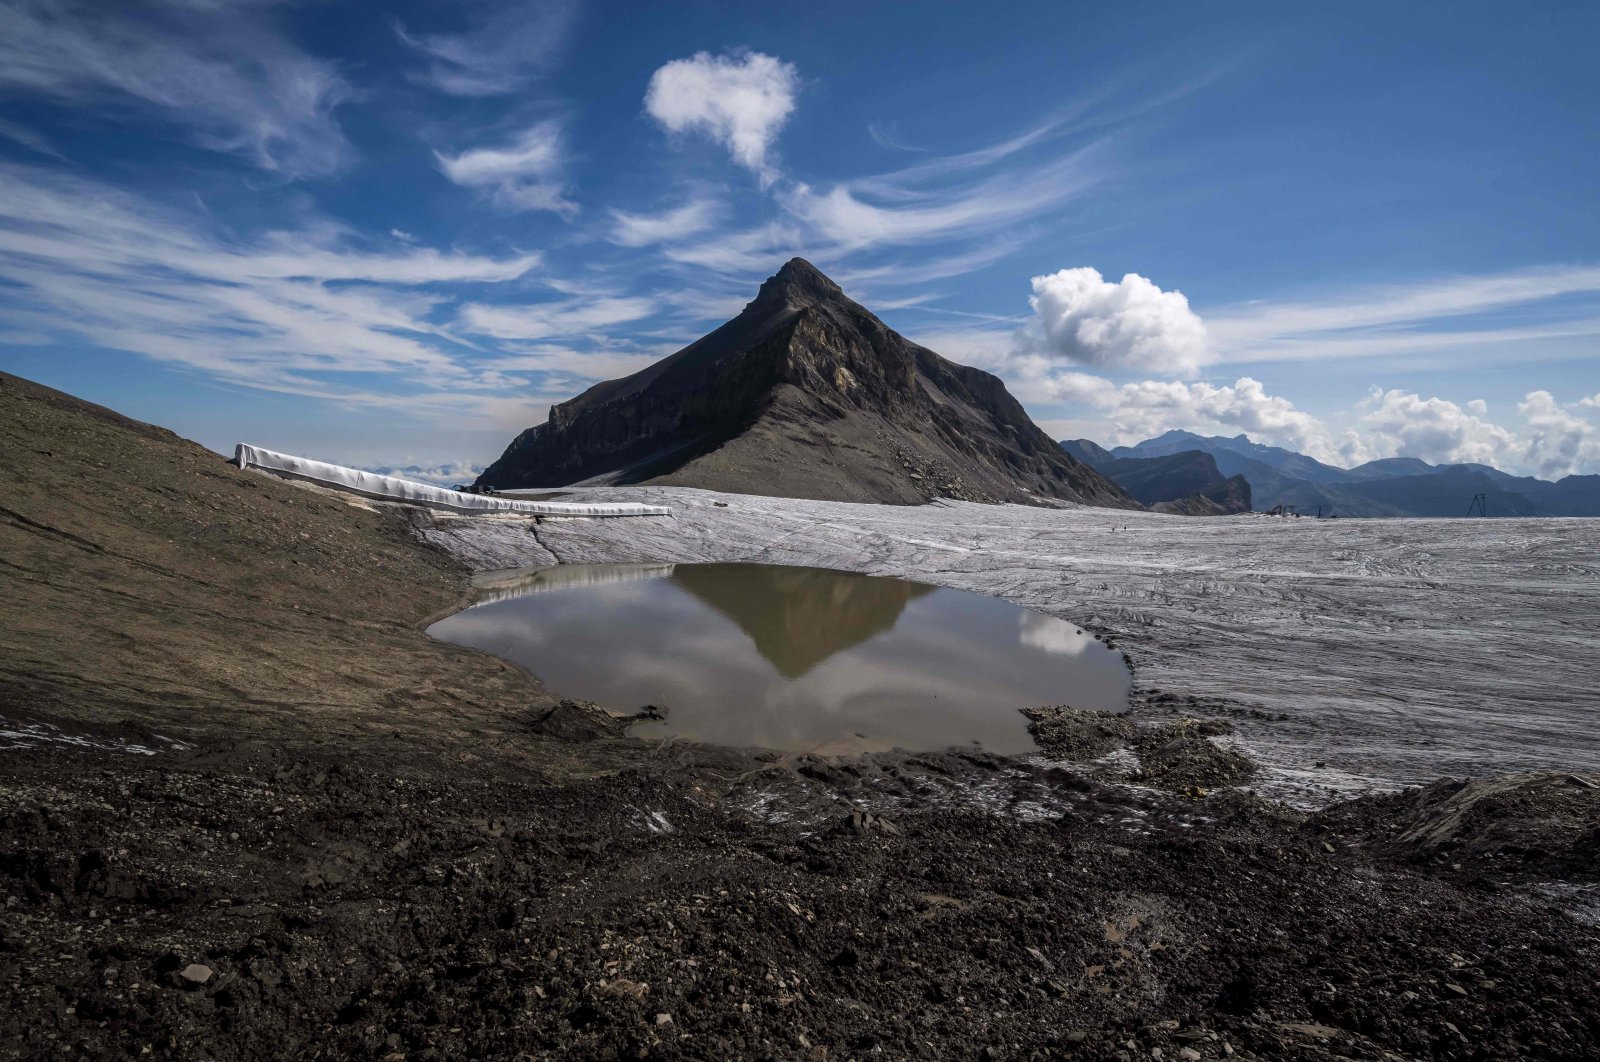 A picture taken on Aug. 6, 2022, shows The Oldenhorn mountain next to the melting Tsanfleuron Glacier above Les Diablerets, Switzerland. Following several heat waves blamed by scientists on climate change, Switzerland is seeing its alpine glaciers melting at an increasingly rapid rate. (AFP Photo)